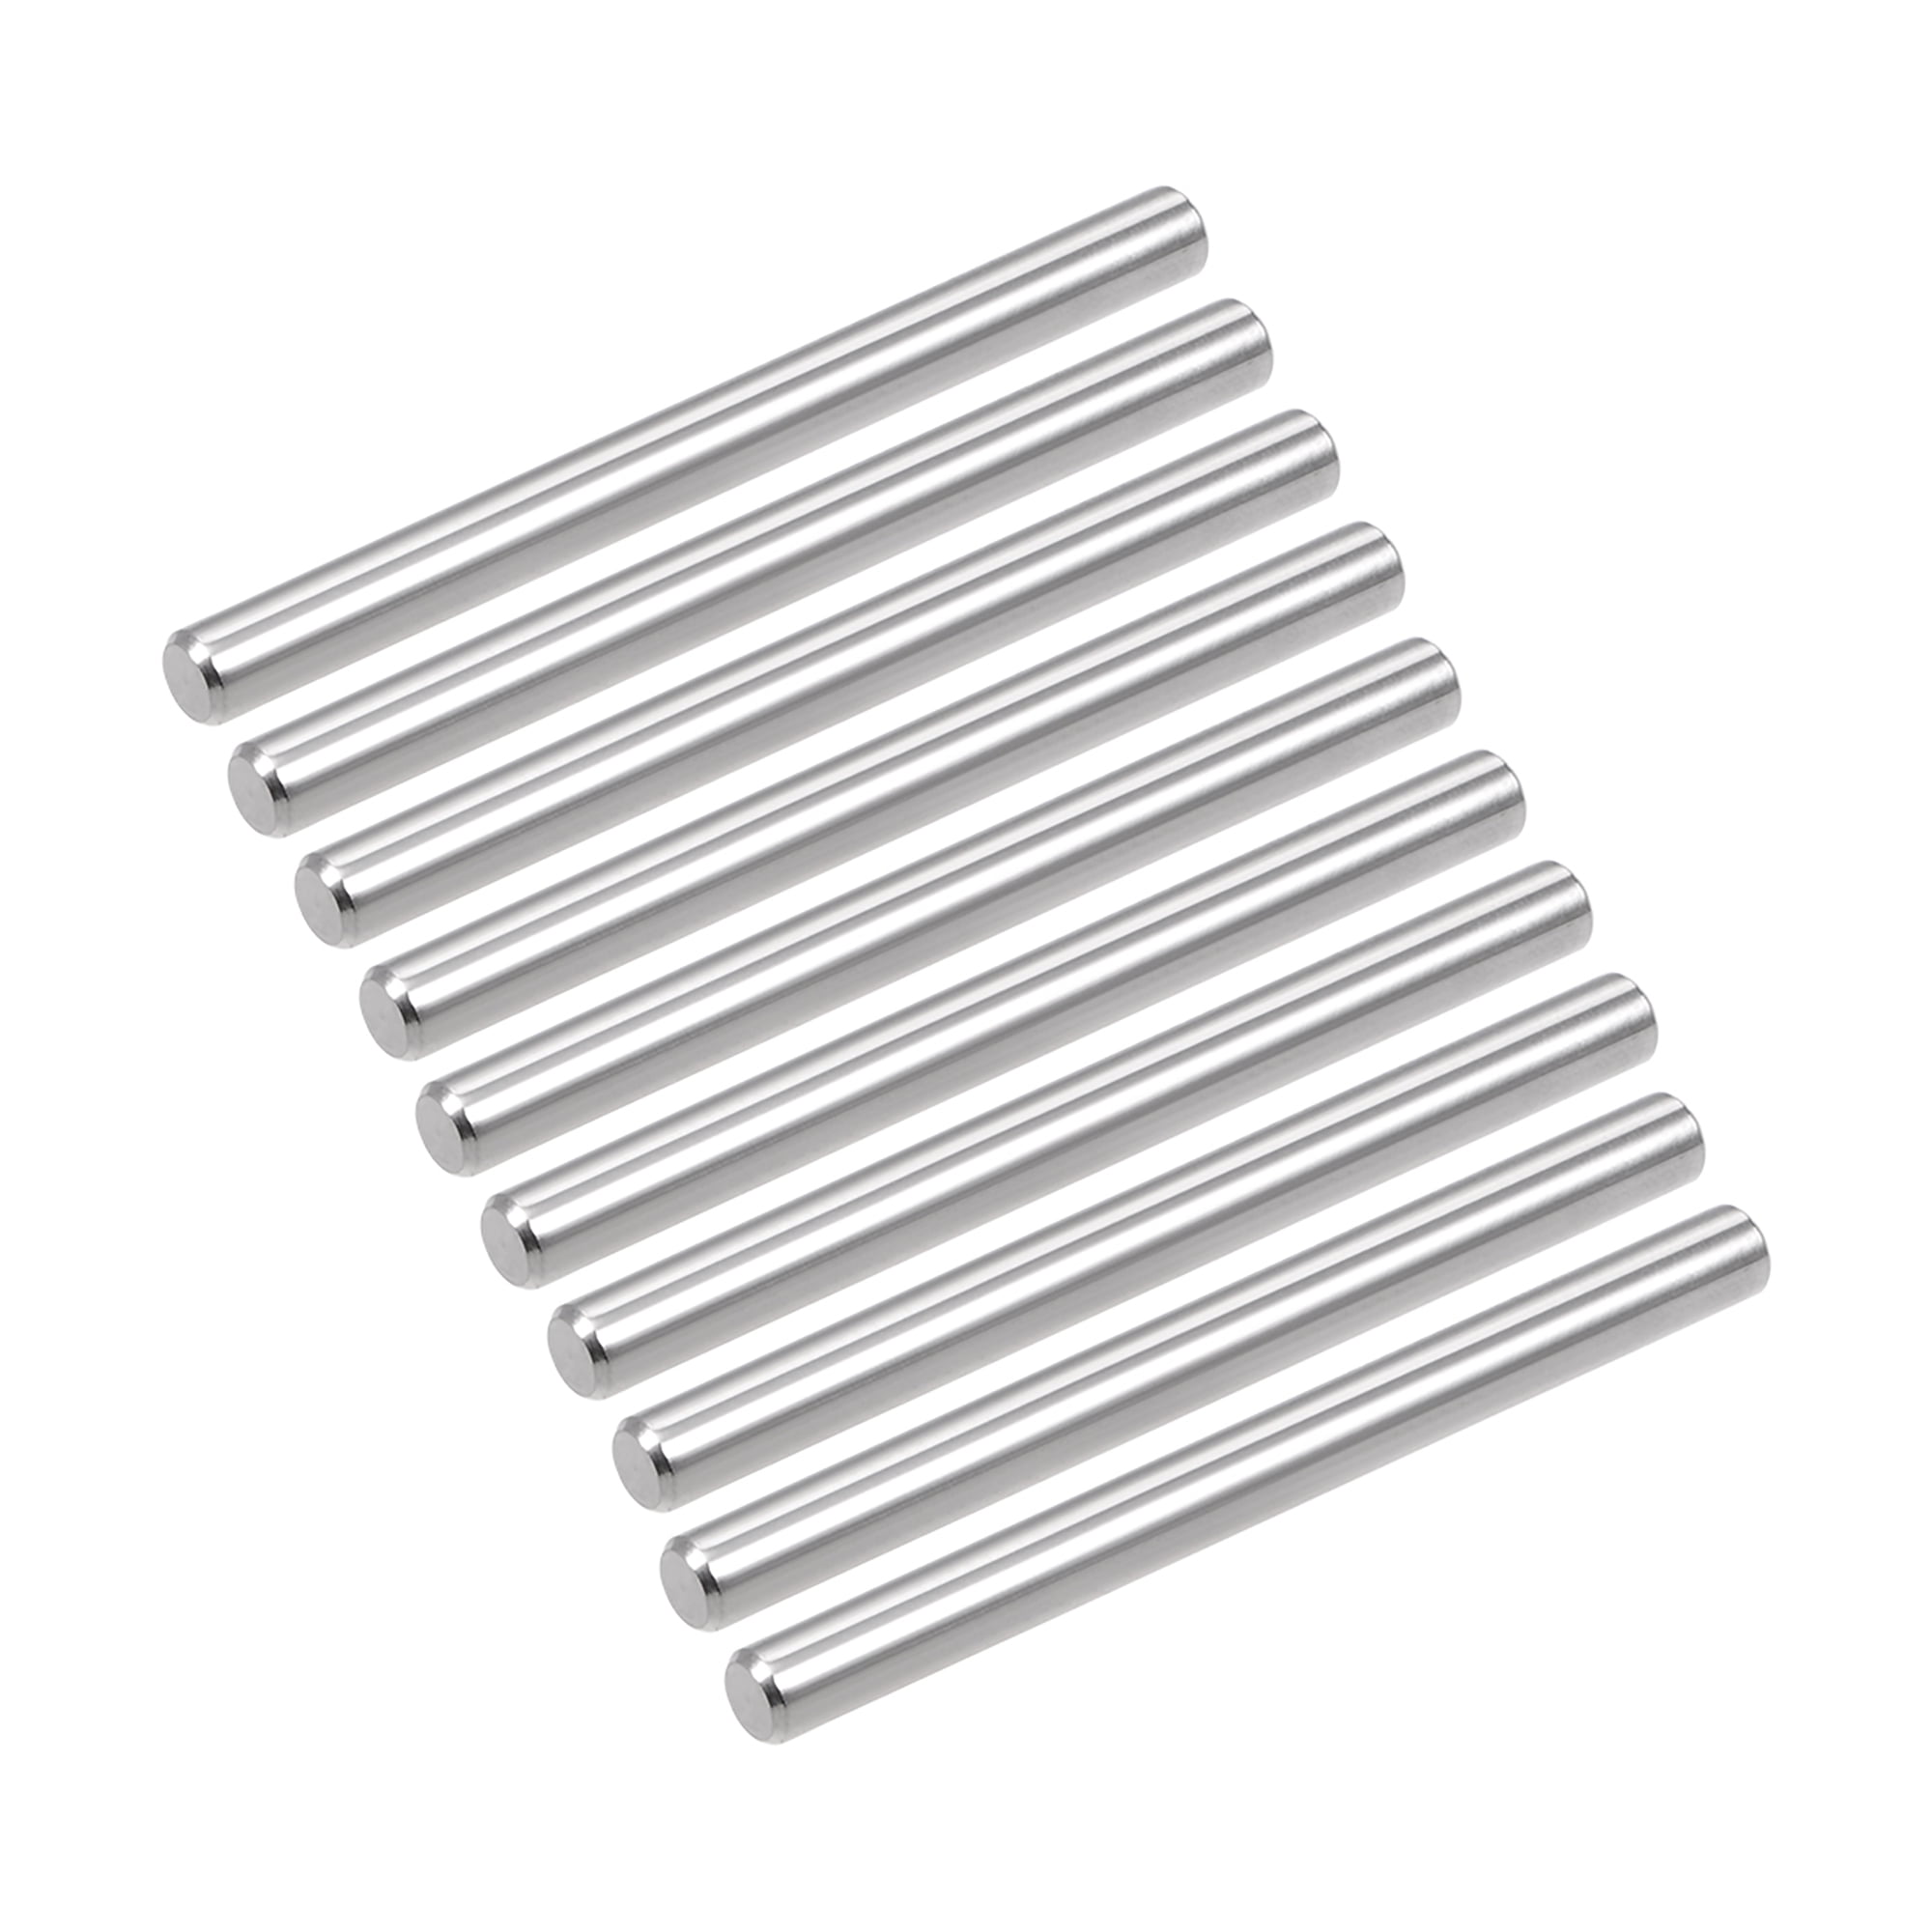 50 Pieces 18-8 Stainless Steel Dowel Pins 5/32" Dia x 3/8" Length 